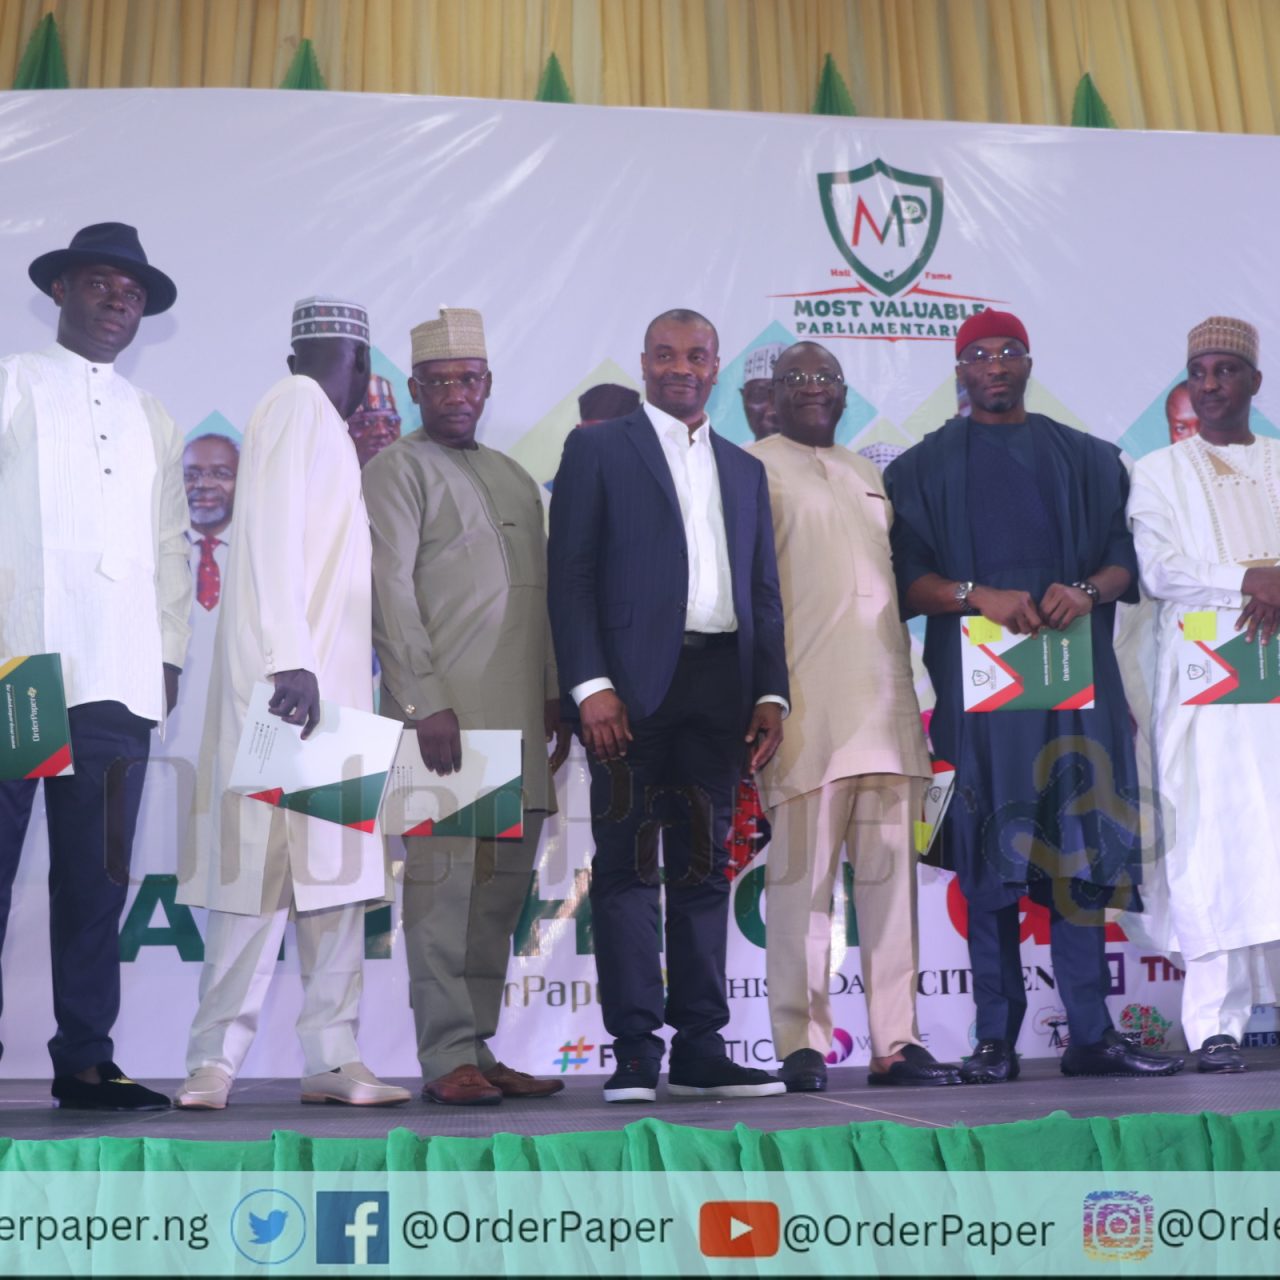 OrderPaper rewards 18 NASS Members for valuable contributions in lawmaking